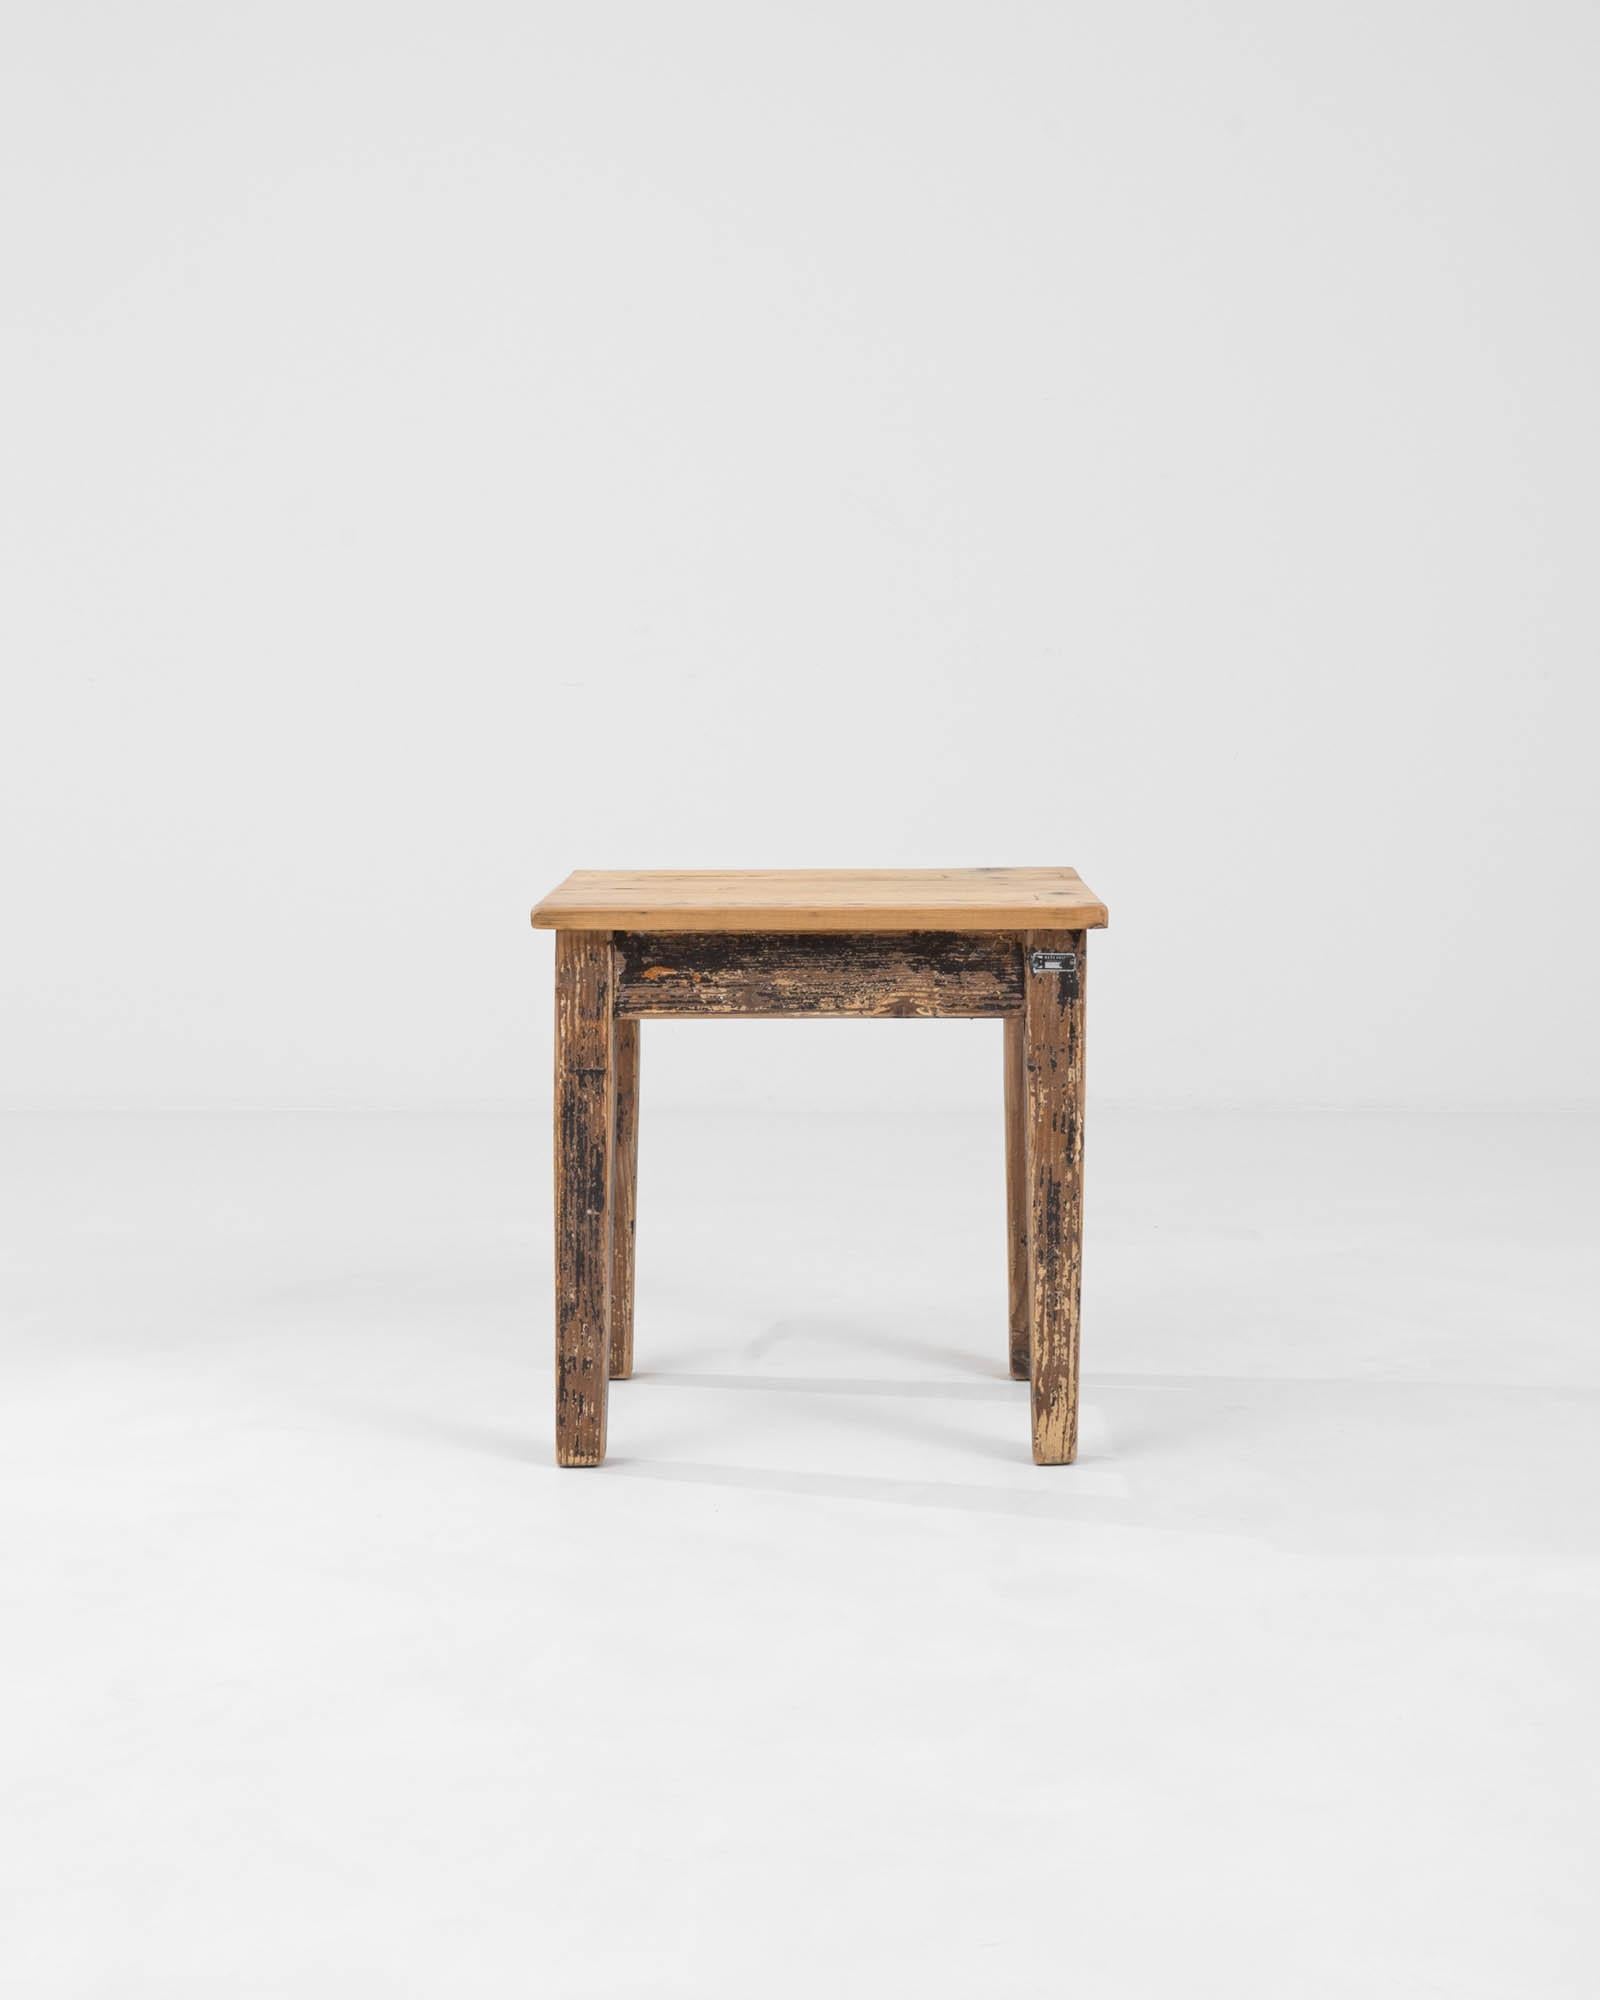 This Early 20th Century Central European stool exudes a sense of history and character. Its wood construction showcases a deep, rich patina, a testament to its age and the stories it must hold. The texture of the wood, grooved and worn, reflects its